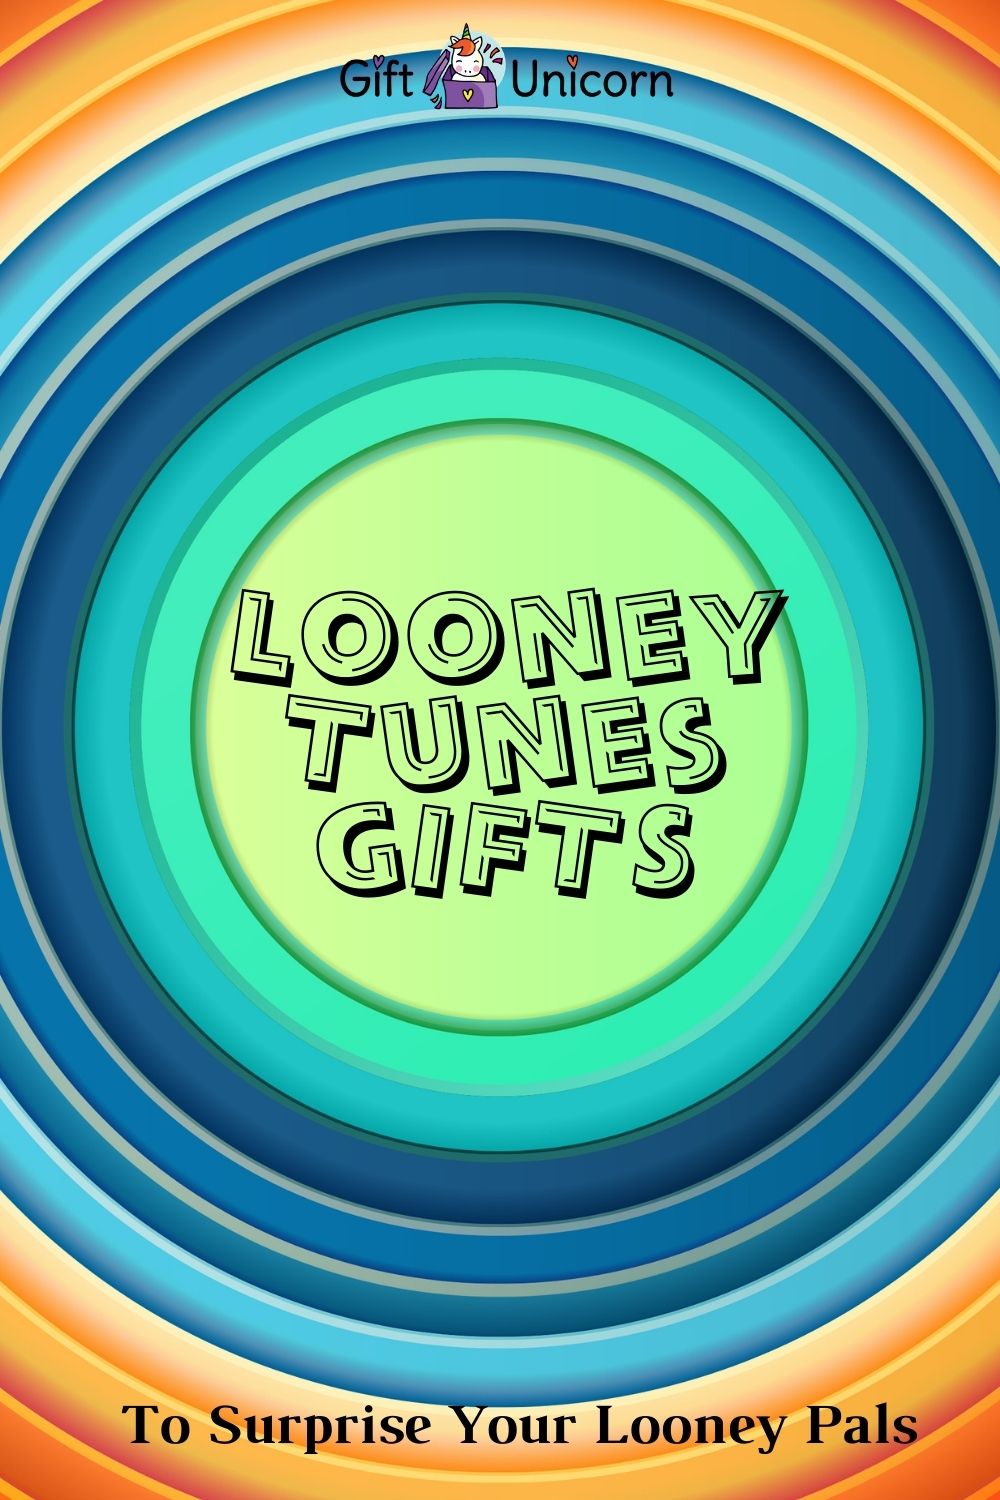 30 Looney Tunes Gifts to Surprise Your Looney Pals - pinterest pin image